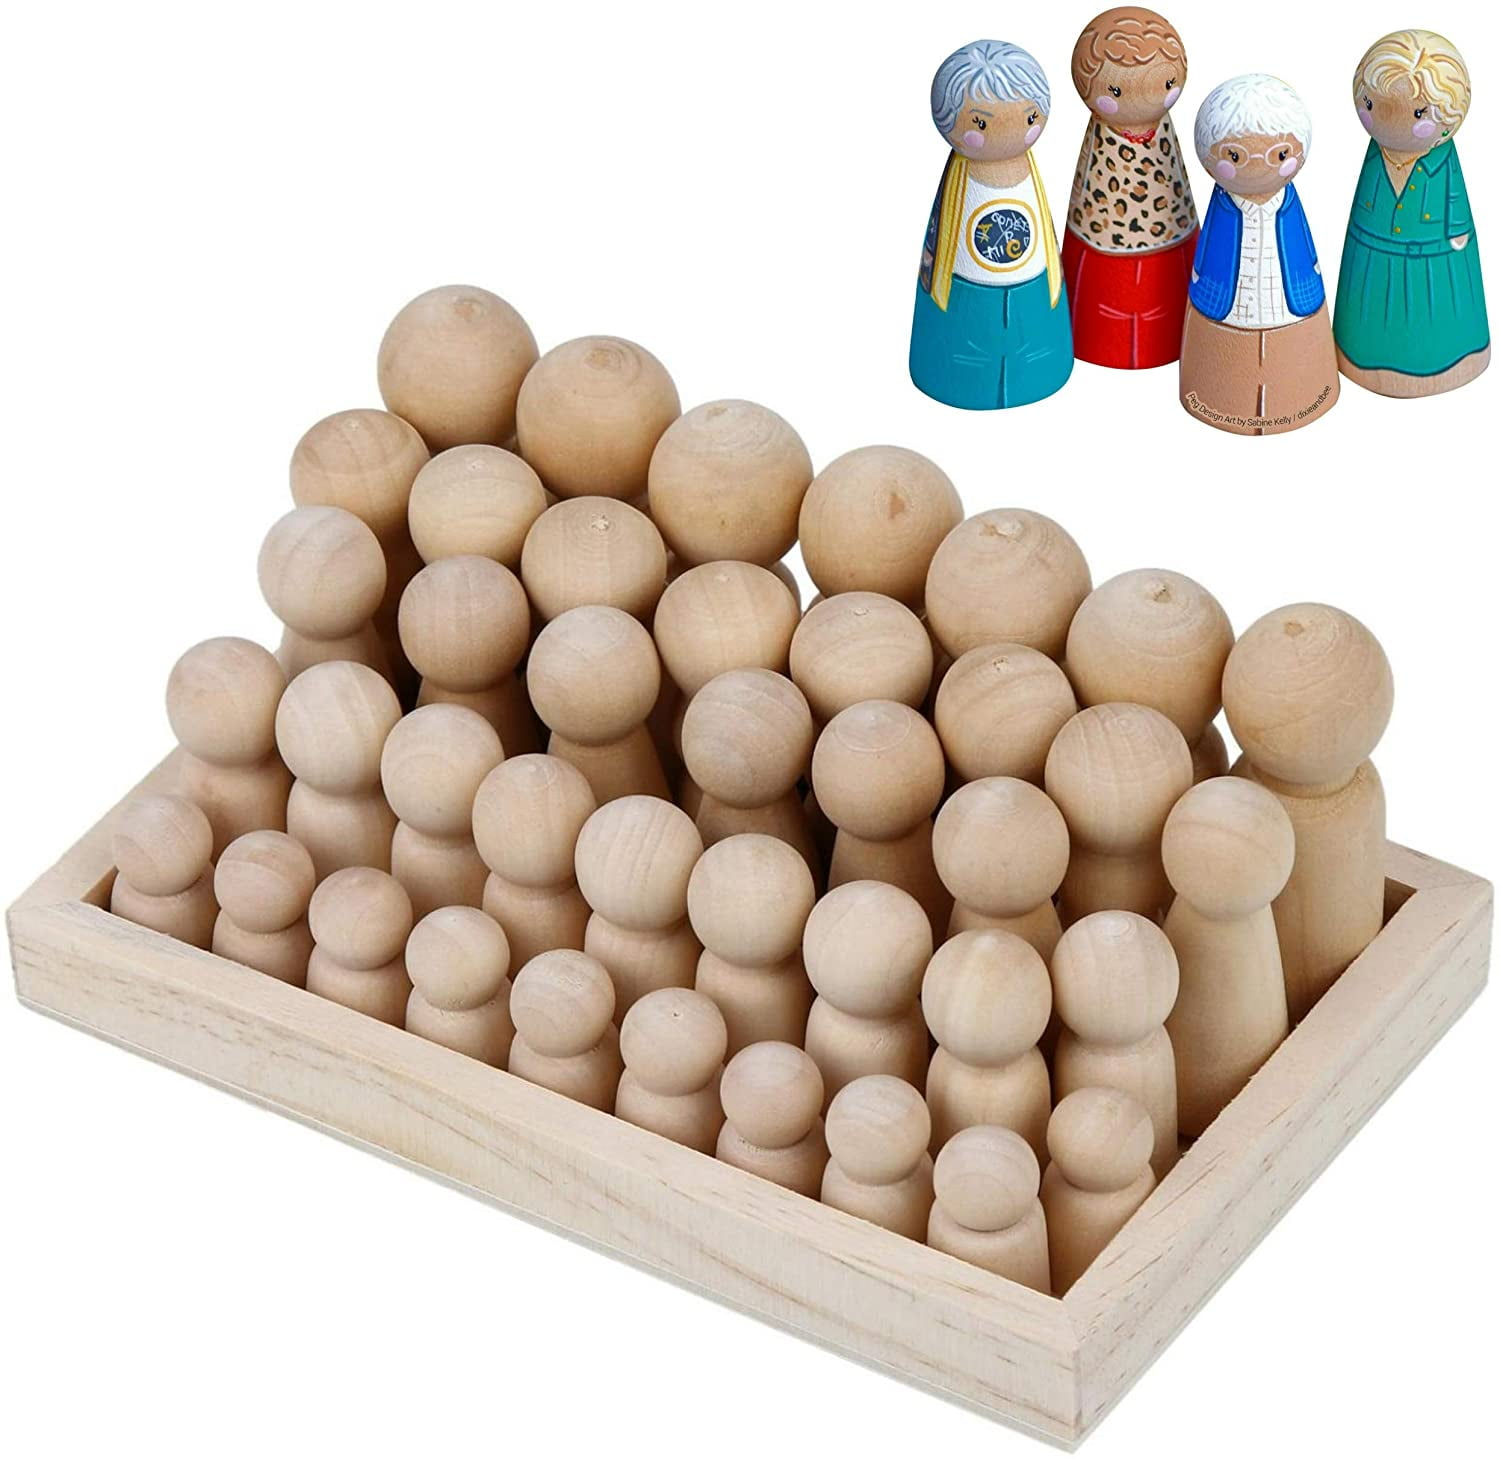 Unfinished Posable Wood Dolls (Pack of 6)